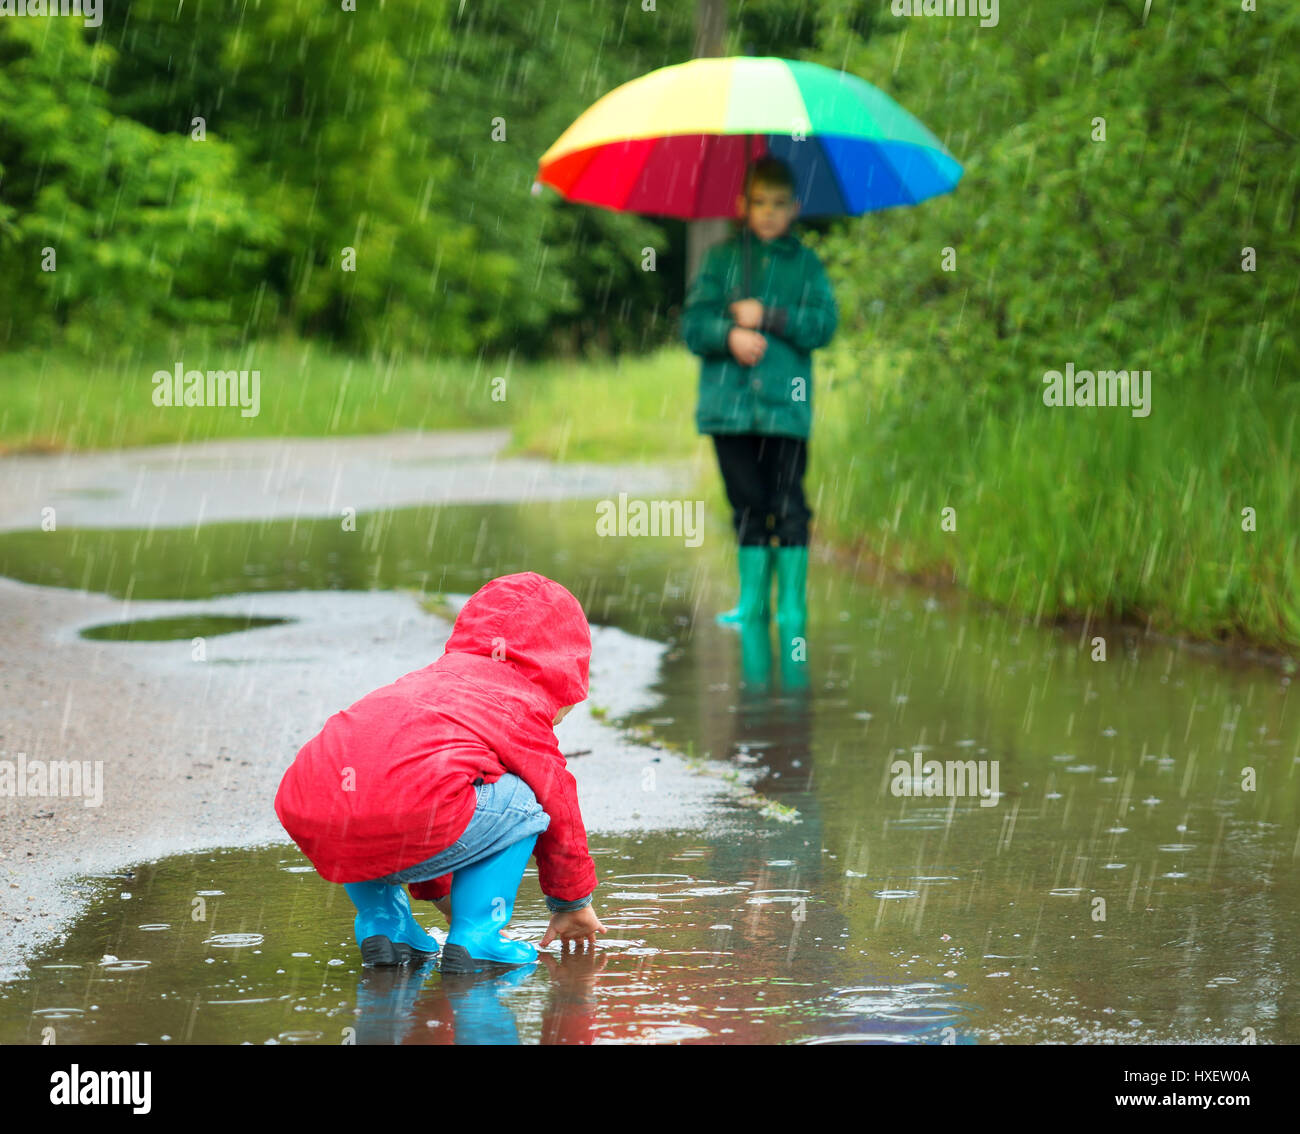 Children walking in wellies in puddle on rainy weather Stock Photo